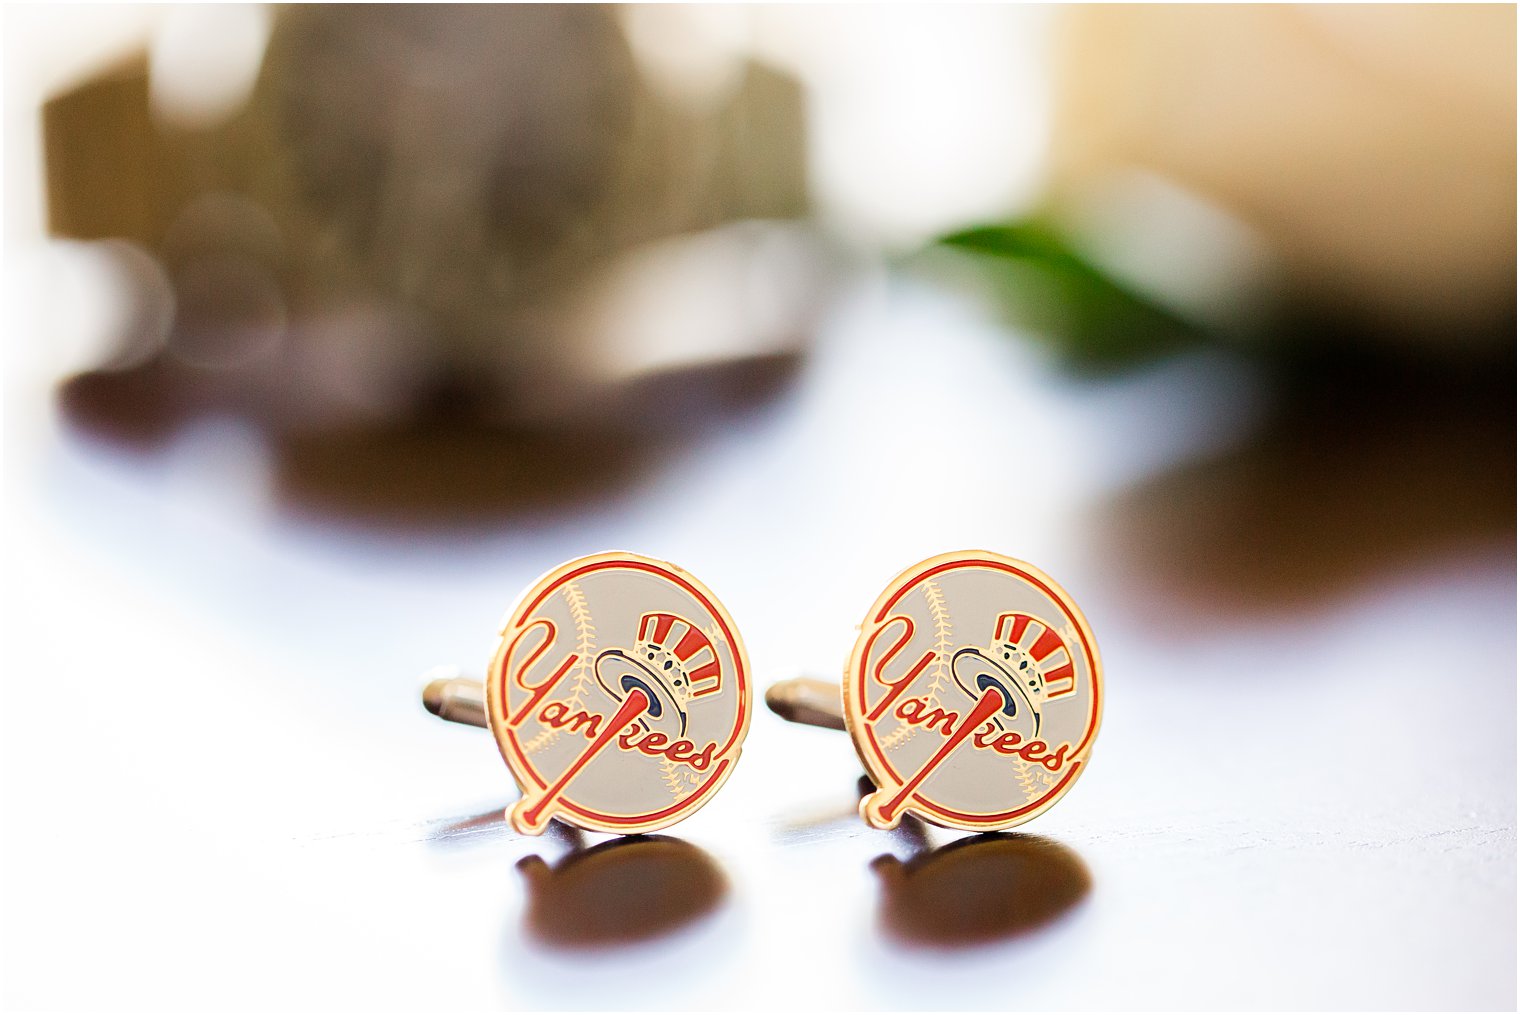 Yankees cufflinks for the groom photographed by Idalia Photography